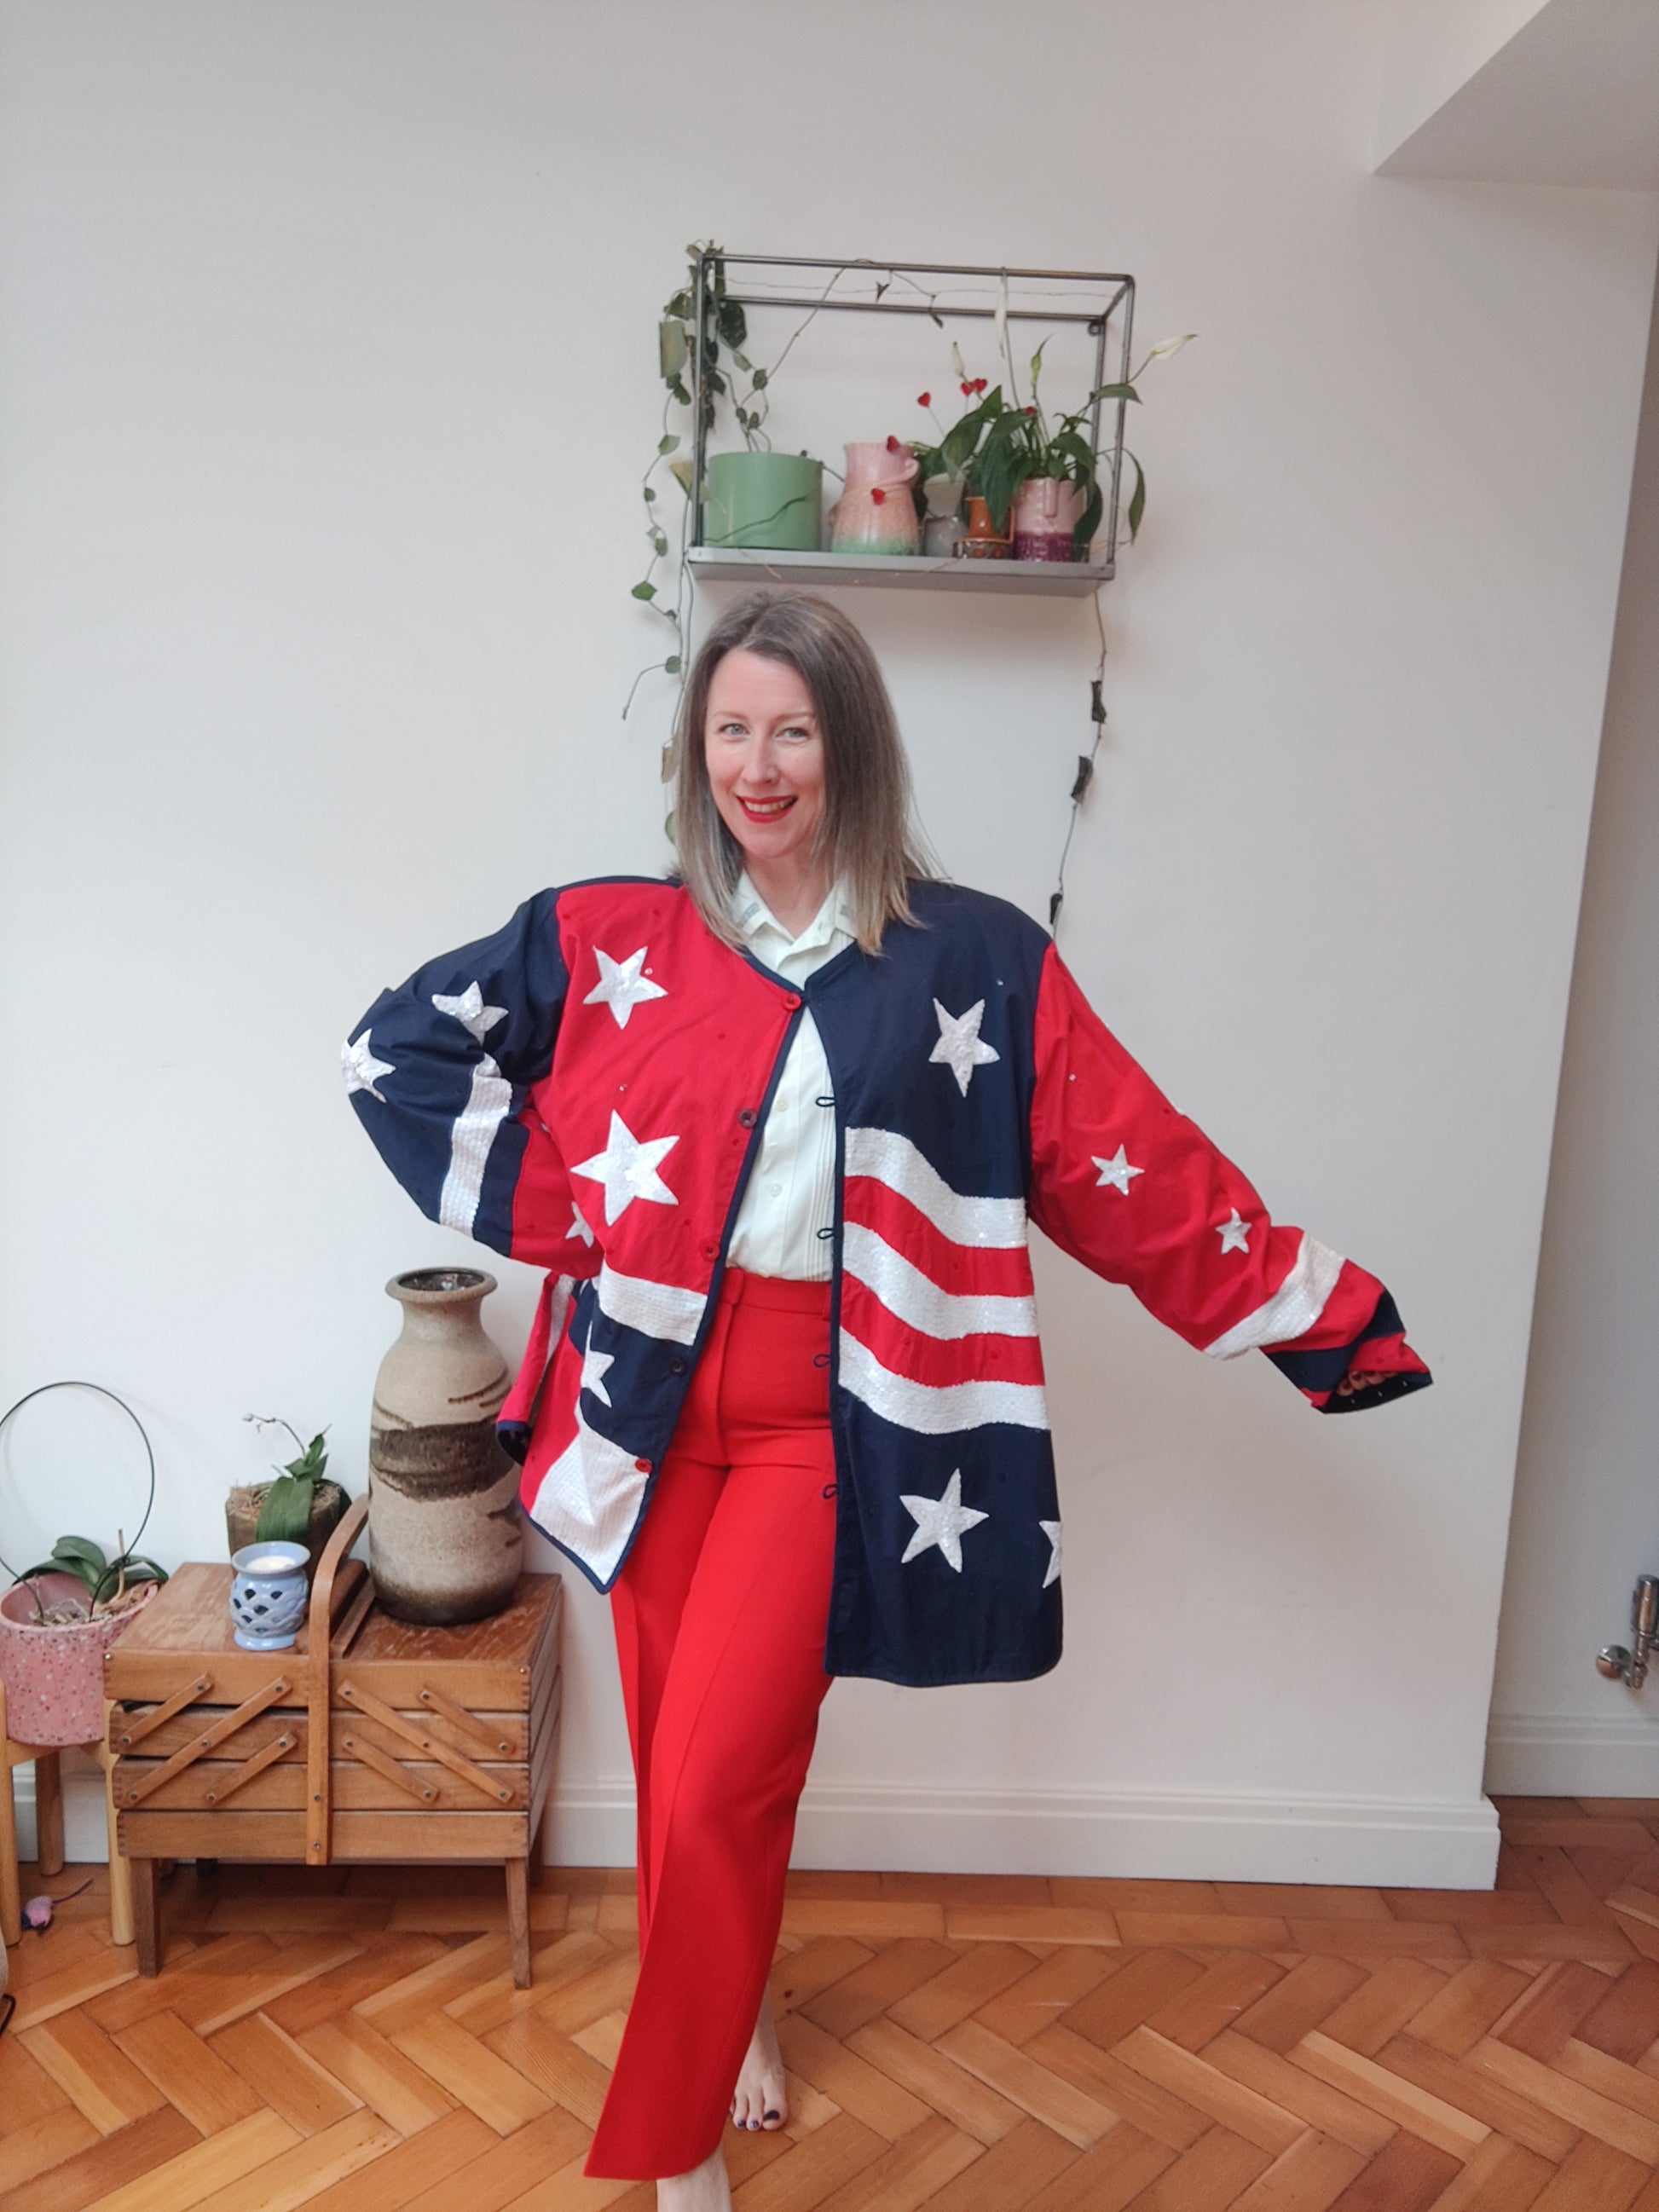 Incredible Jacket with stars and stripes